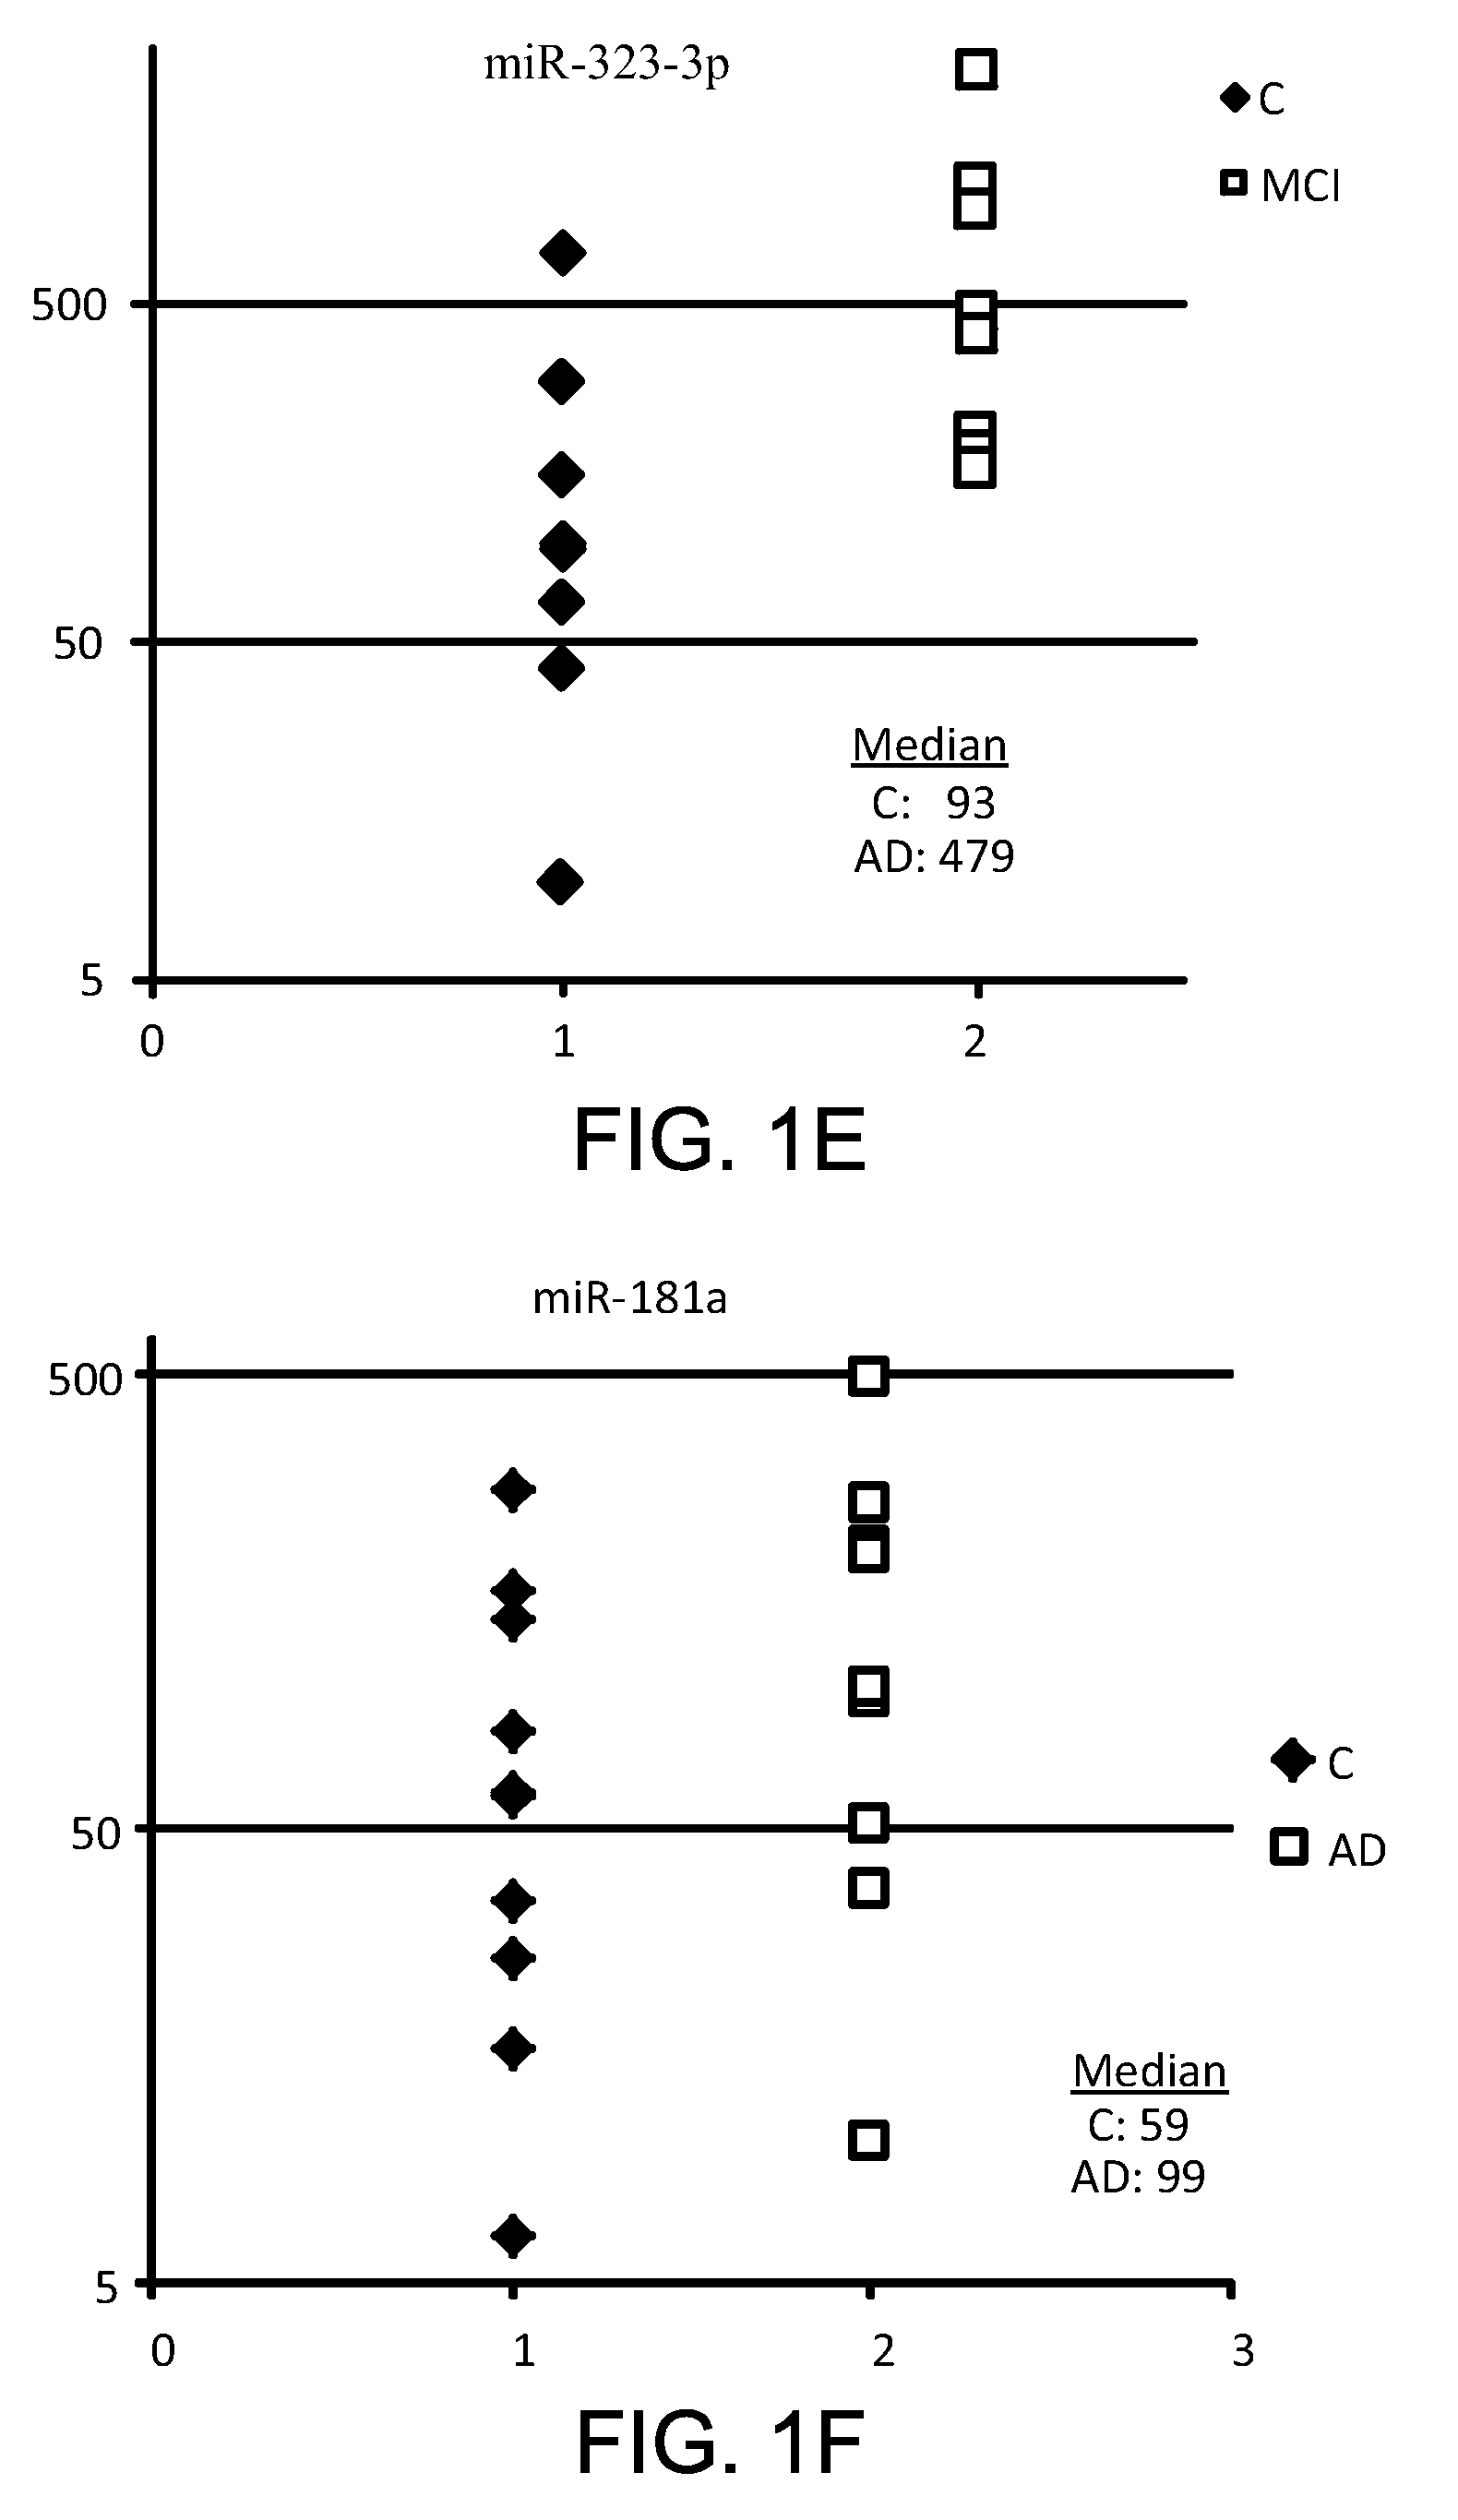 Methods of using small RNA from bodily fluids for diagnosis and monitoring of neurodegenerative diseases